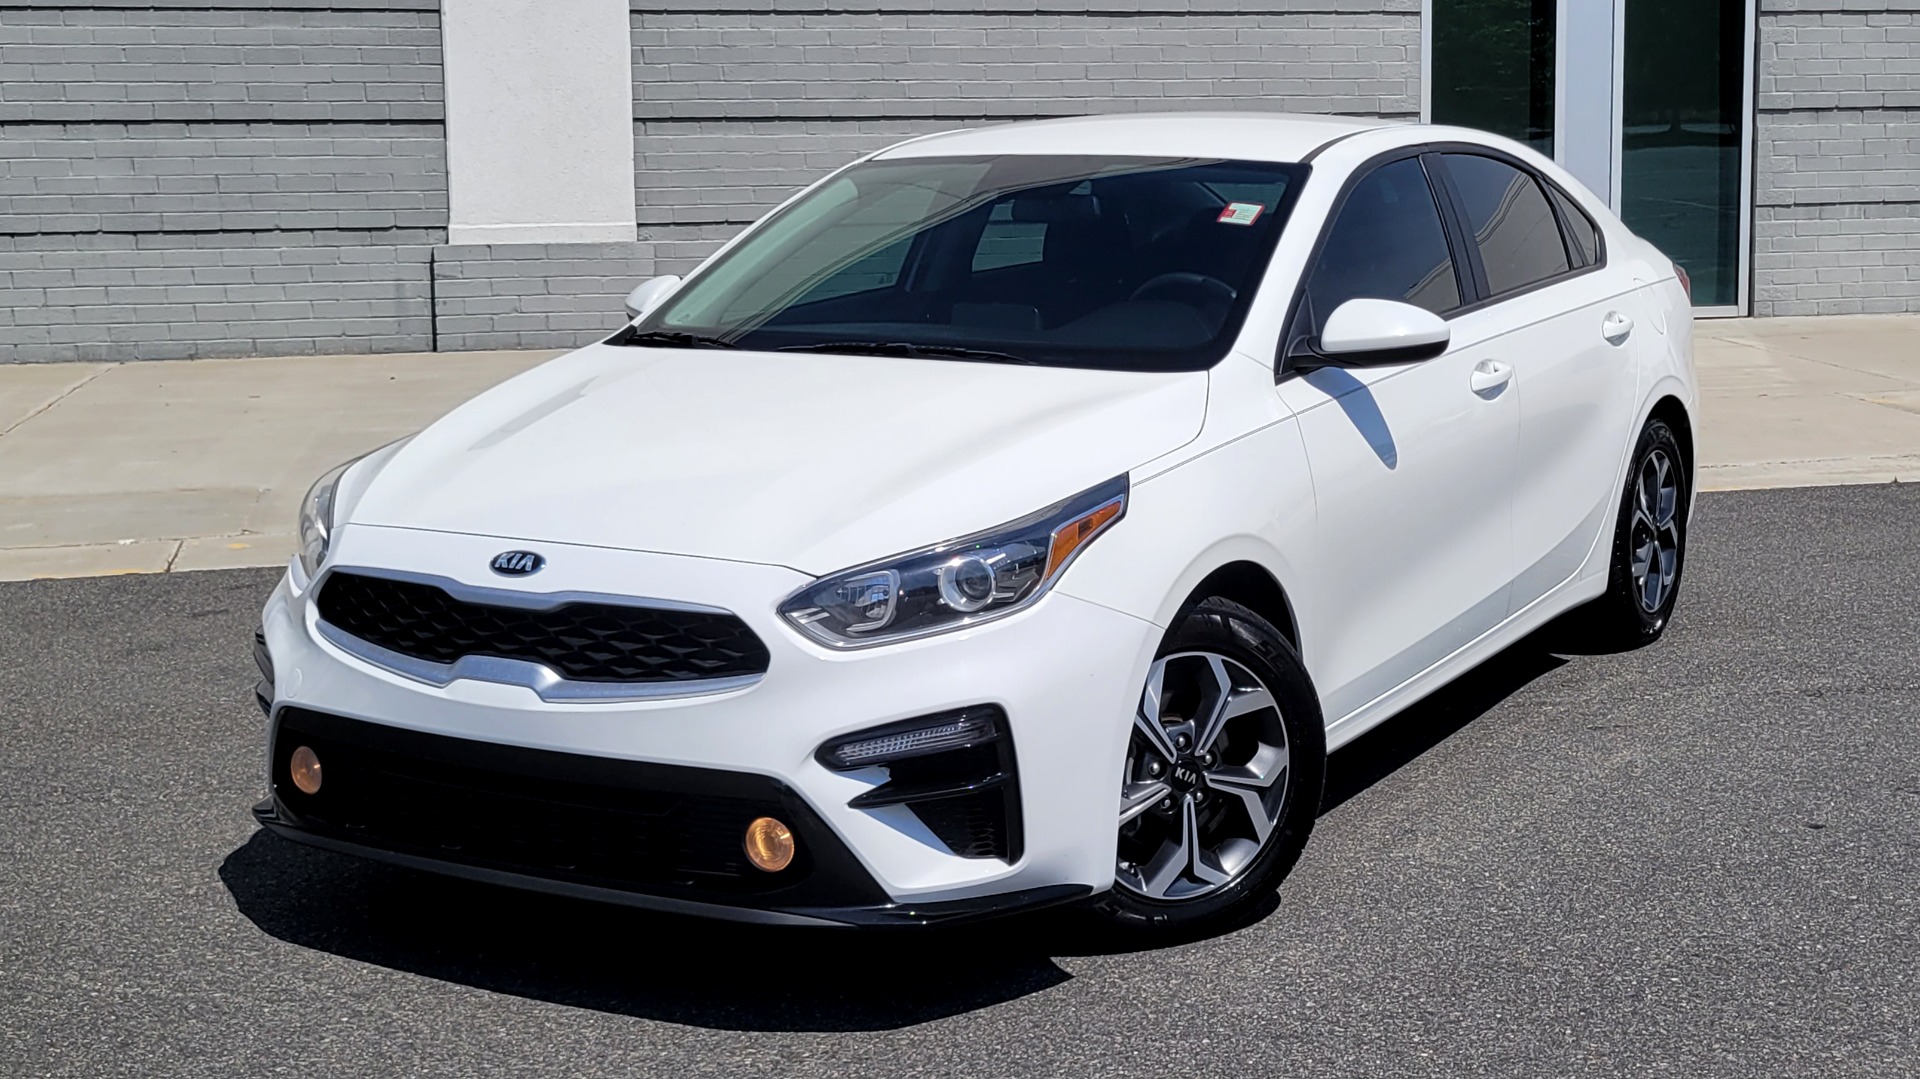 Used 2019 Kia FORTE LXS IVT 2.0L SEDAN / CVT TRANS / APPLE / DUAL-ZONE AIR / REARVIEW for sale $16,995 at Formula Imports in Charlotte NC 28227 1